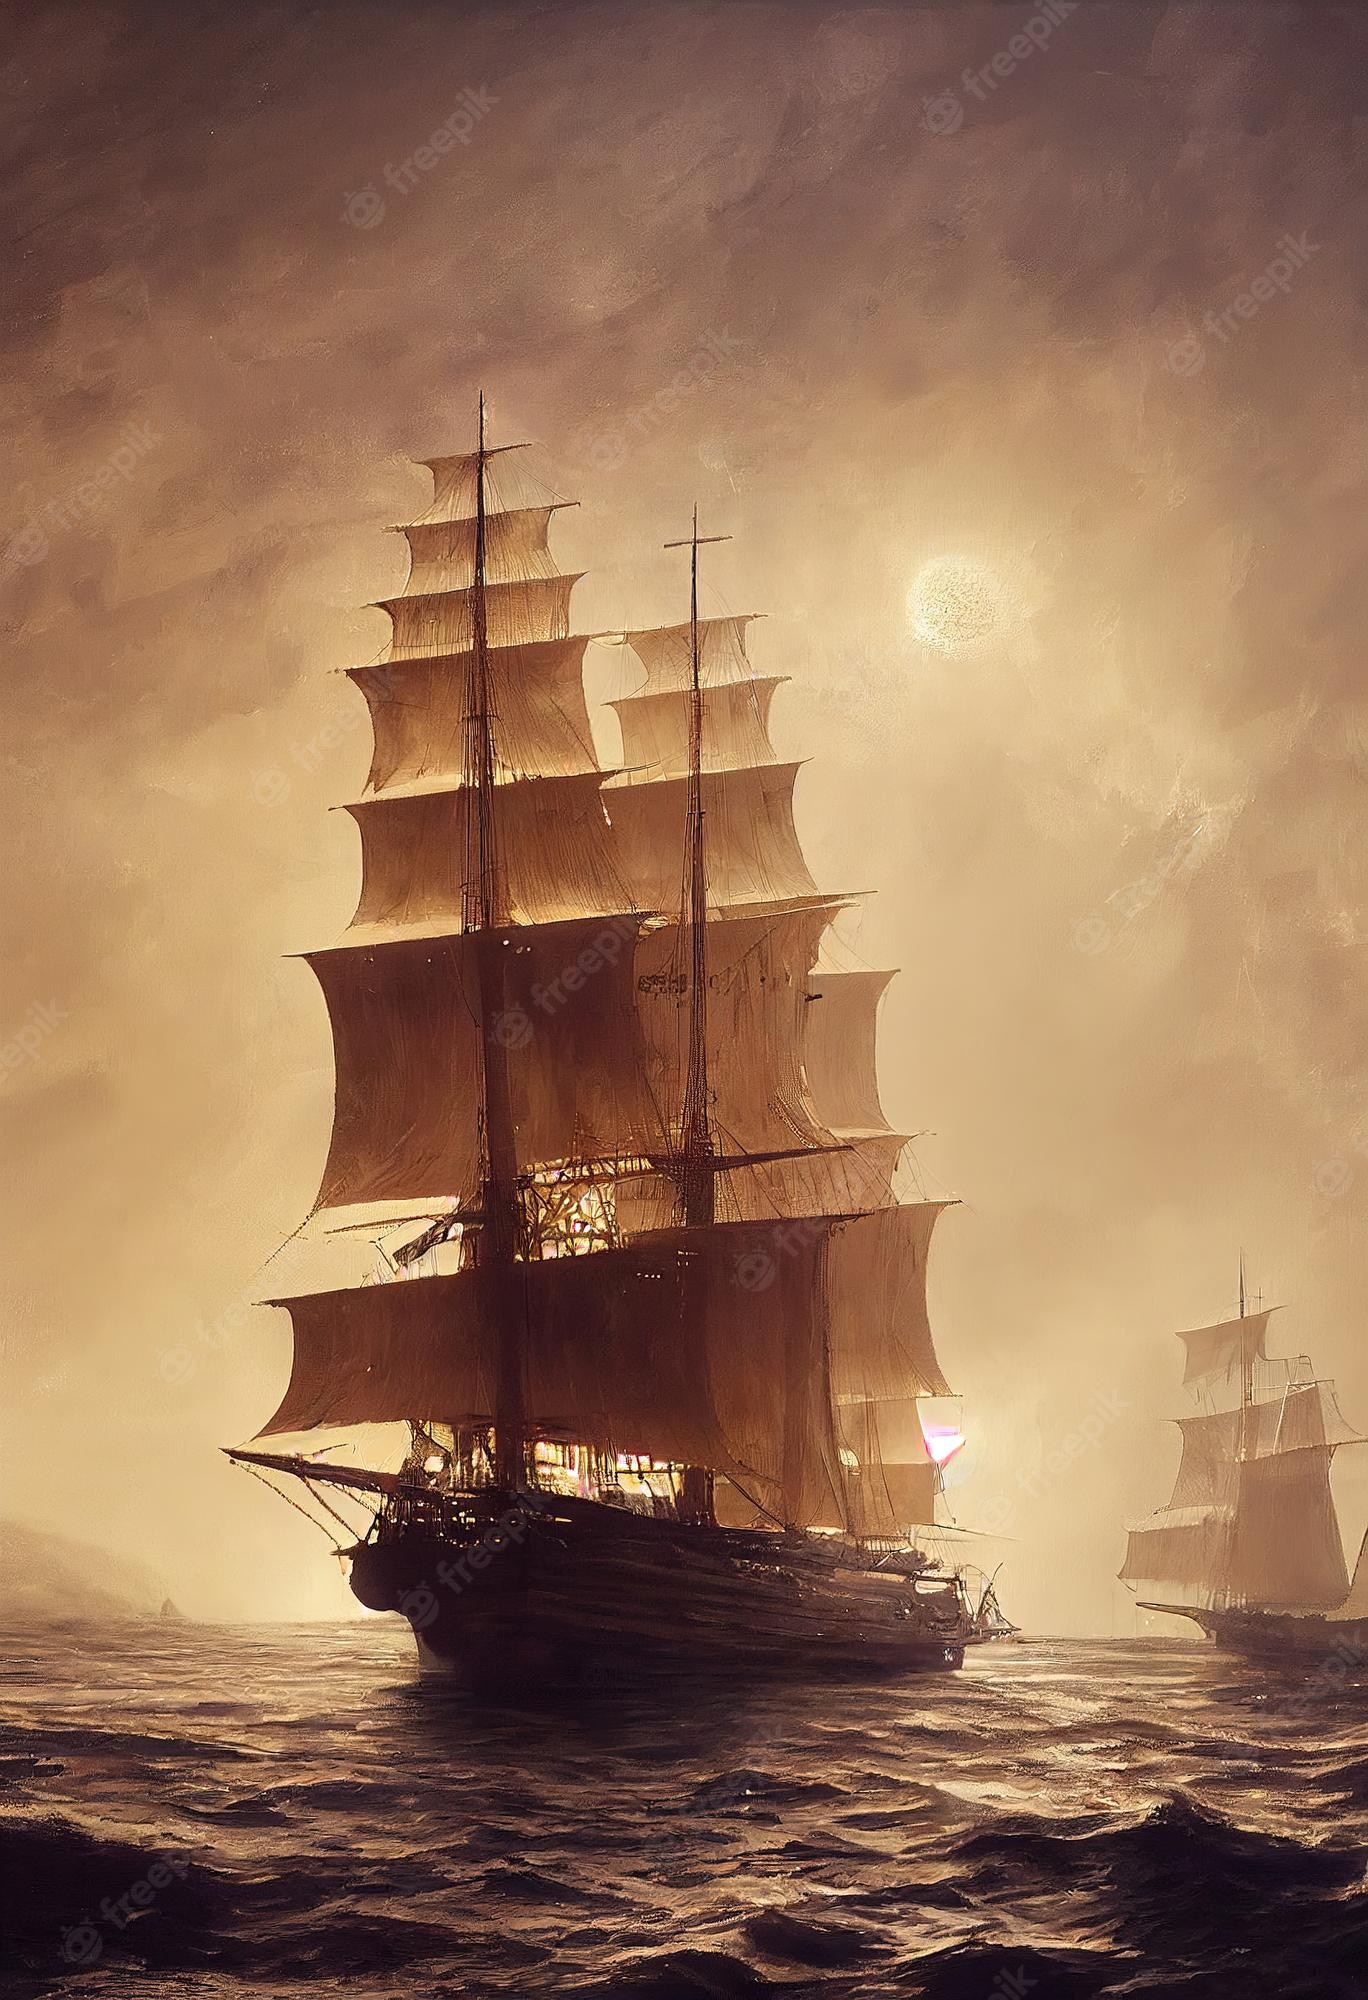 Premium photo an ancient pirate ship with tattered sails is sailing the ocean the concept of a pirate adventure